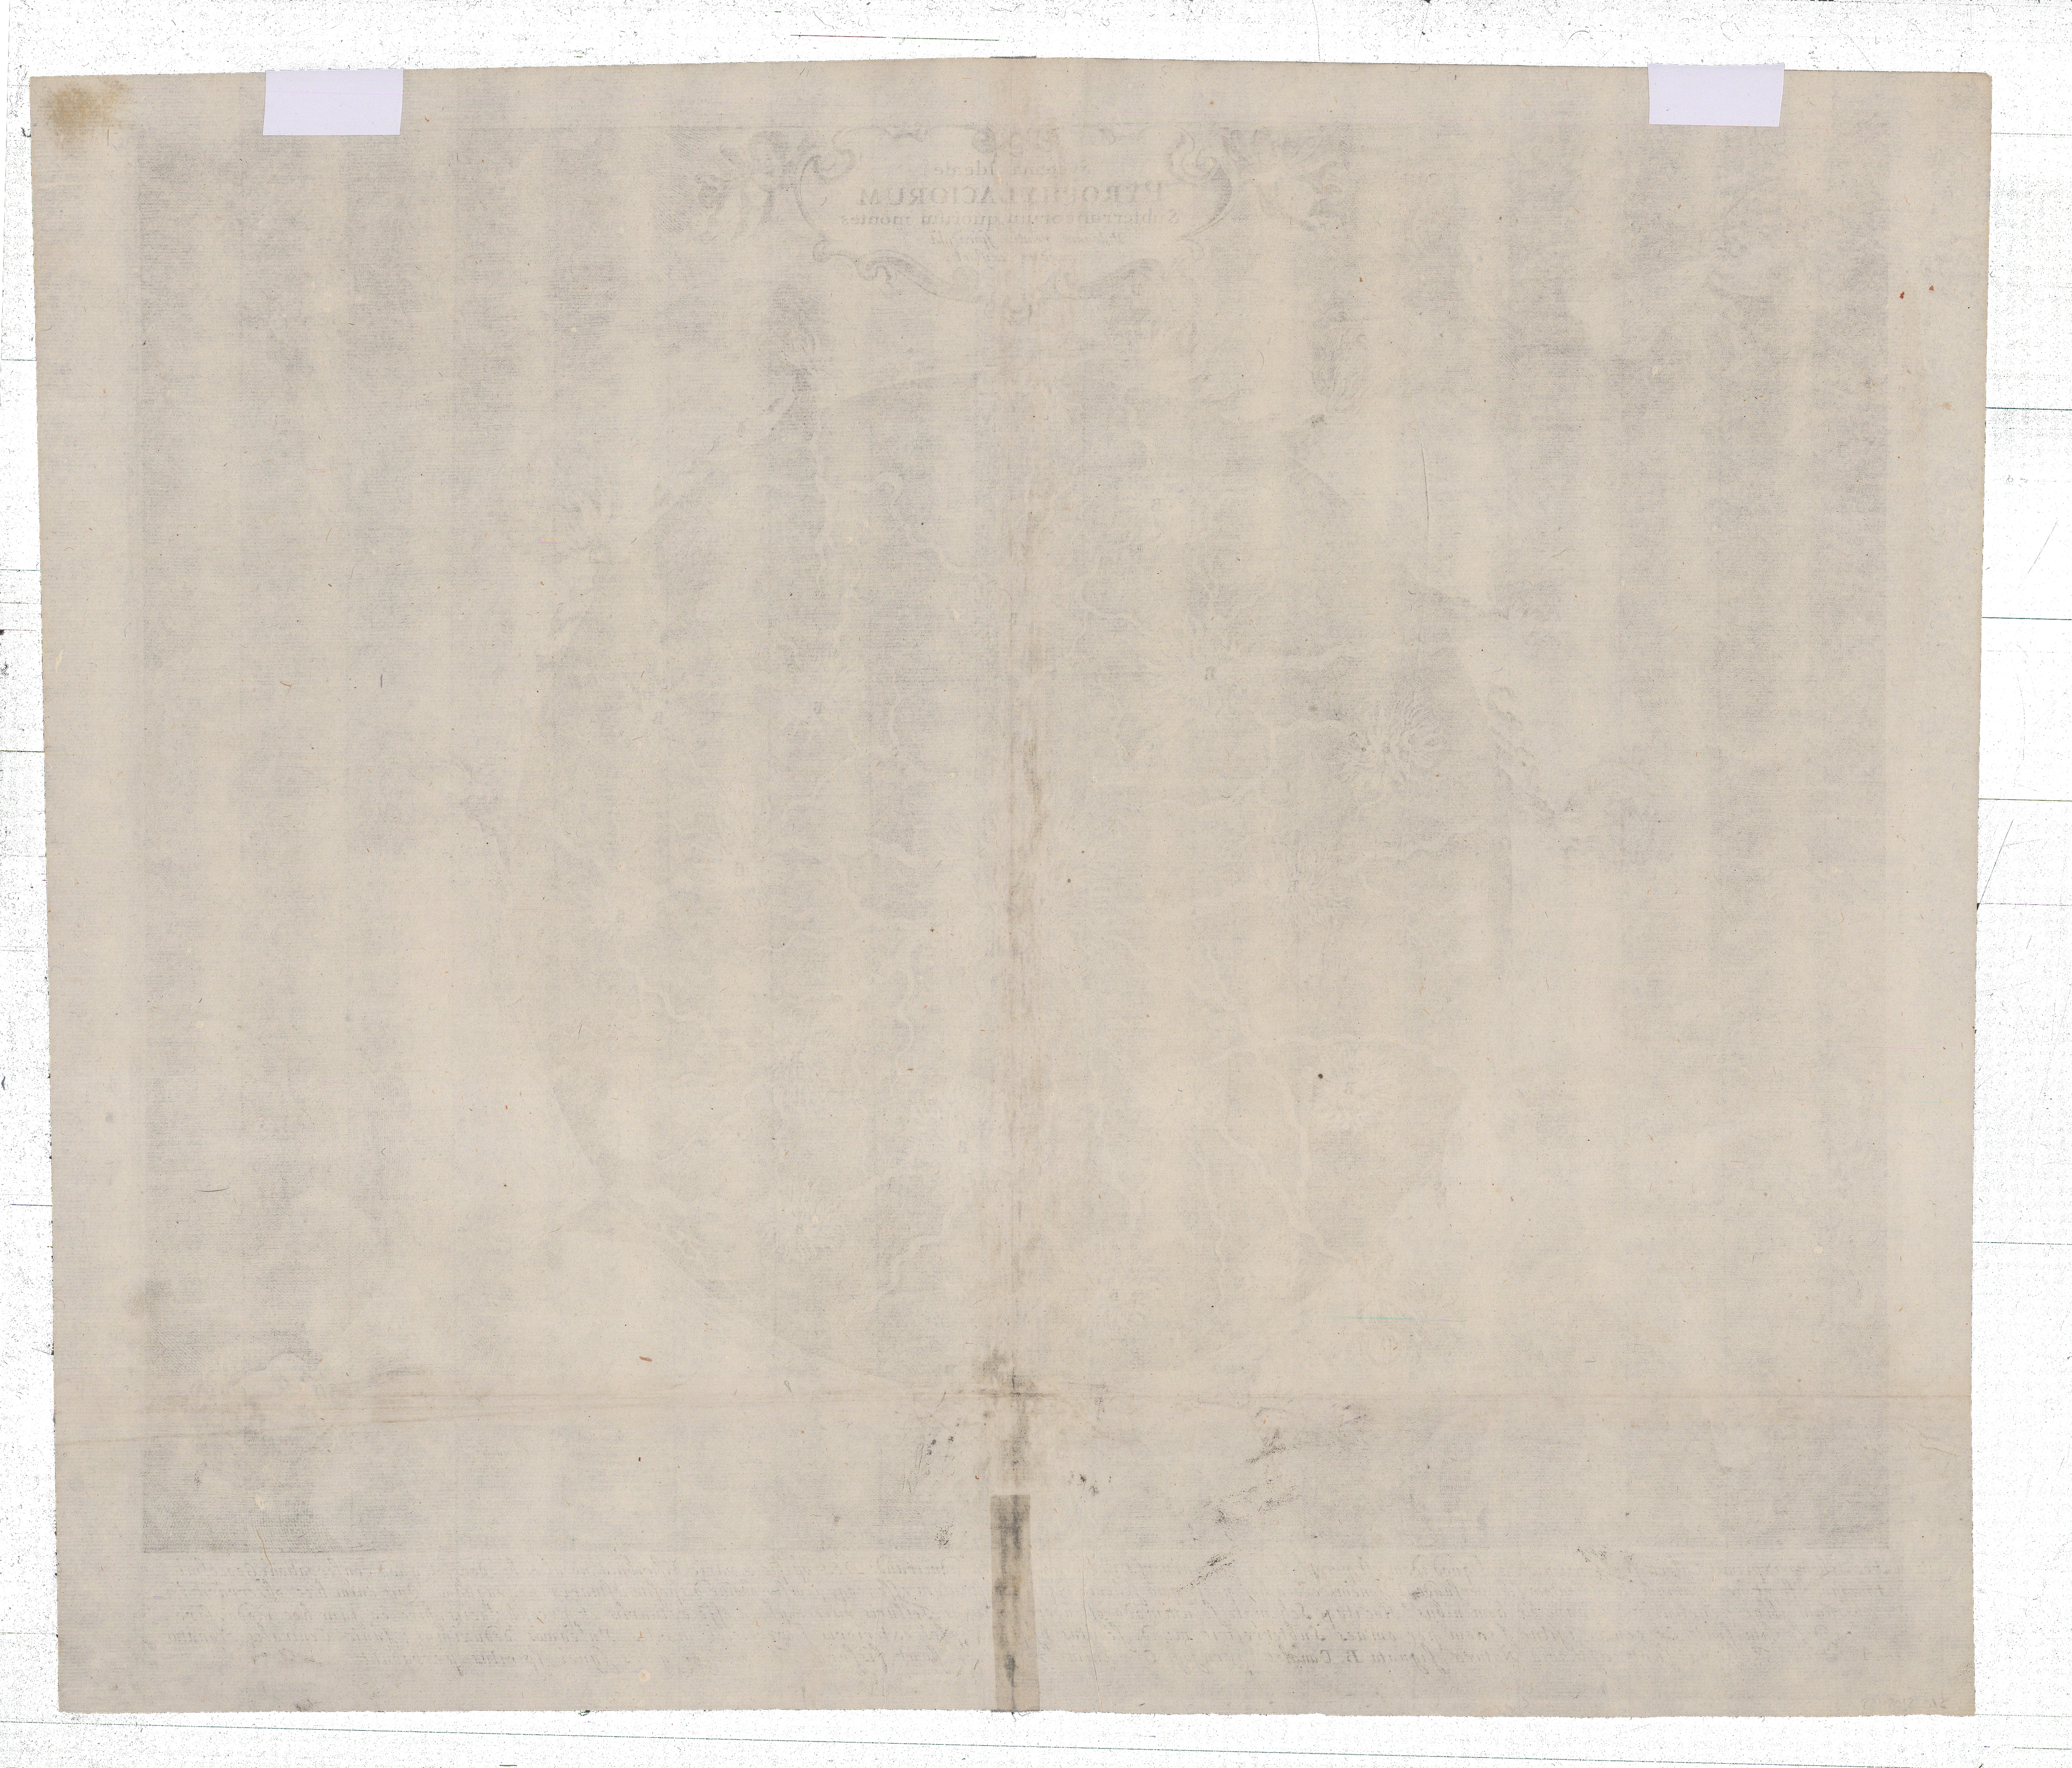 The verso - back - of a map image. The page is blank, but hints of the map on the recto - front - of the page can be seen through the paper.